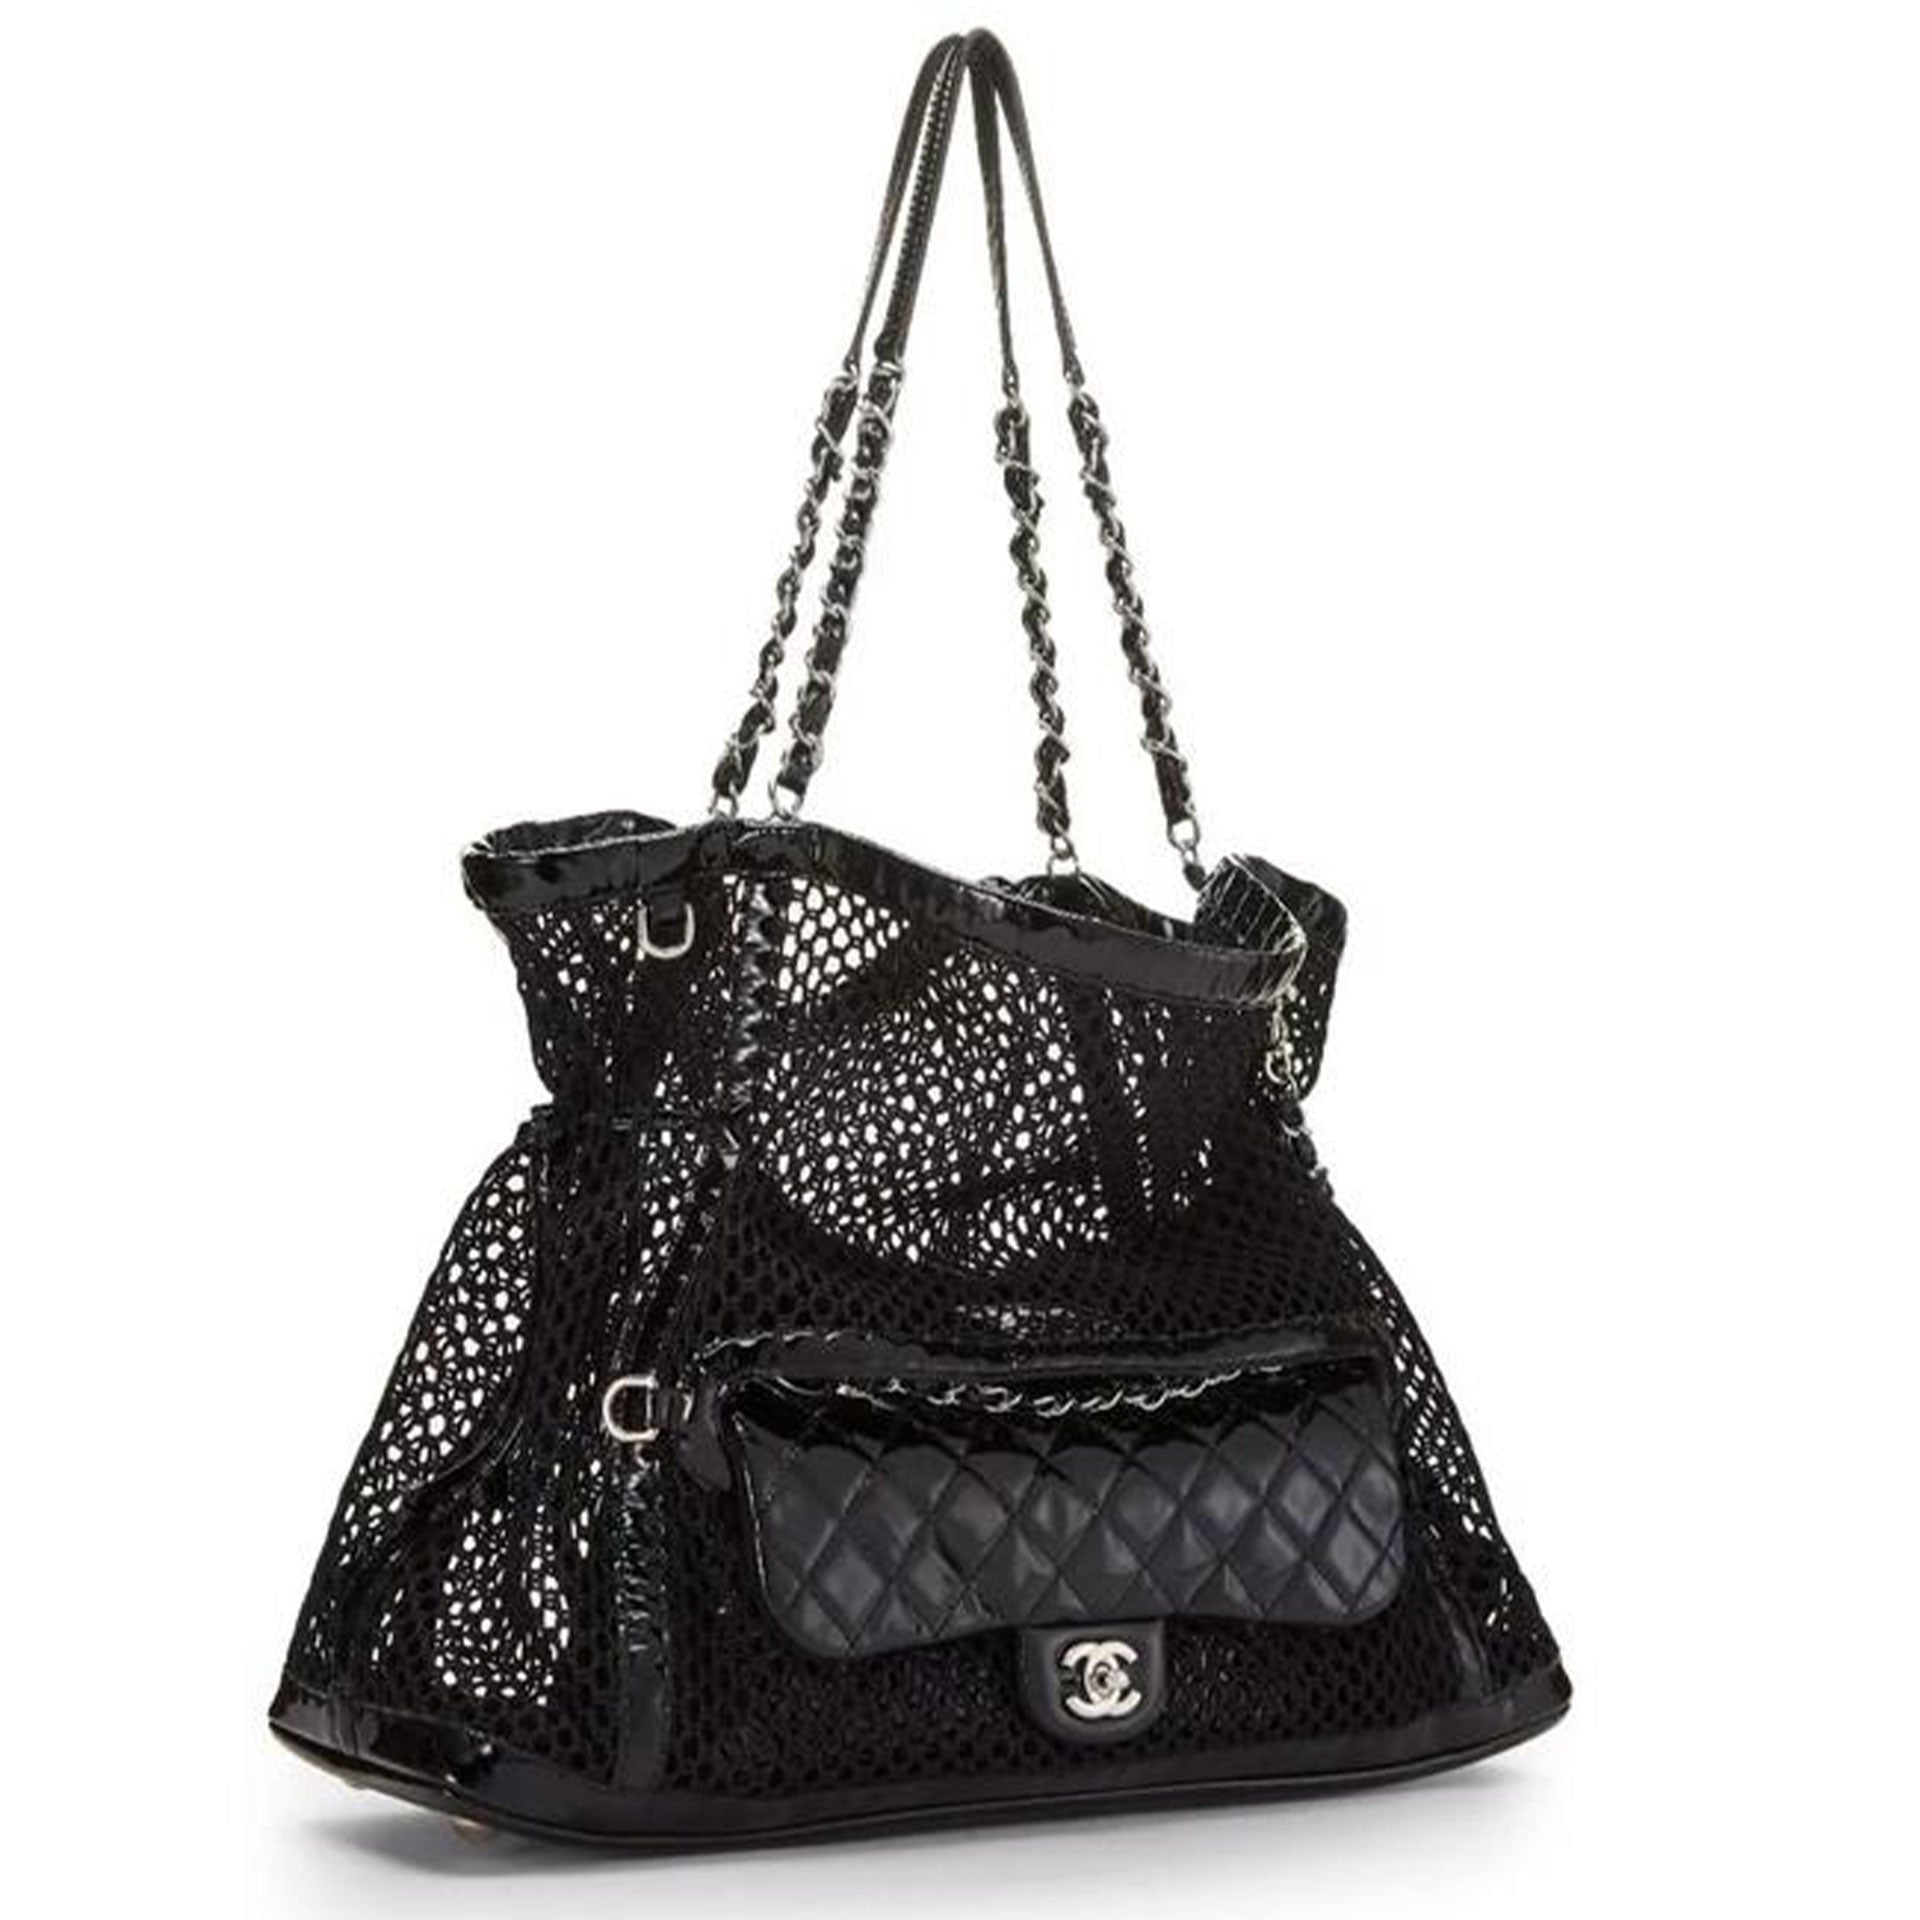 Chanel Shopping Classic Flap Cruise Mesh Woven Crochet 2 in 1 Black Patent Leather and Nylon Tote